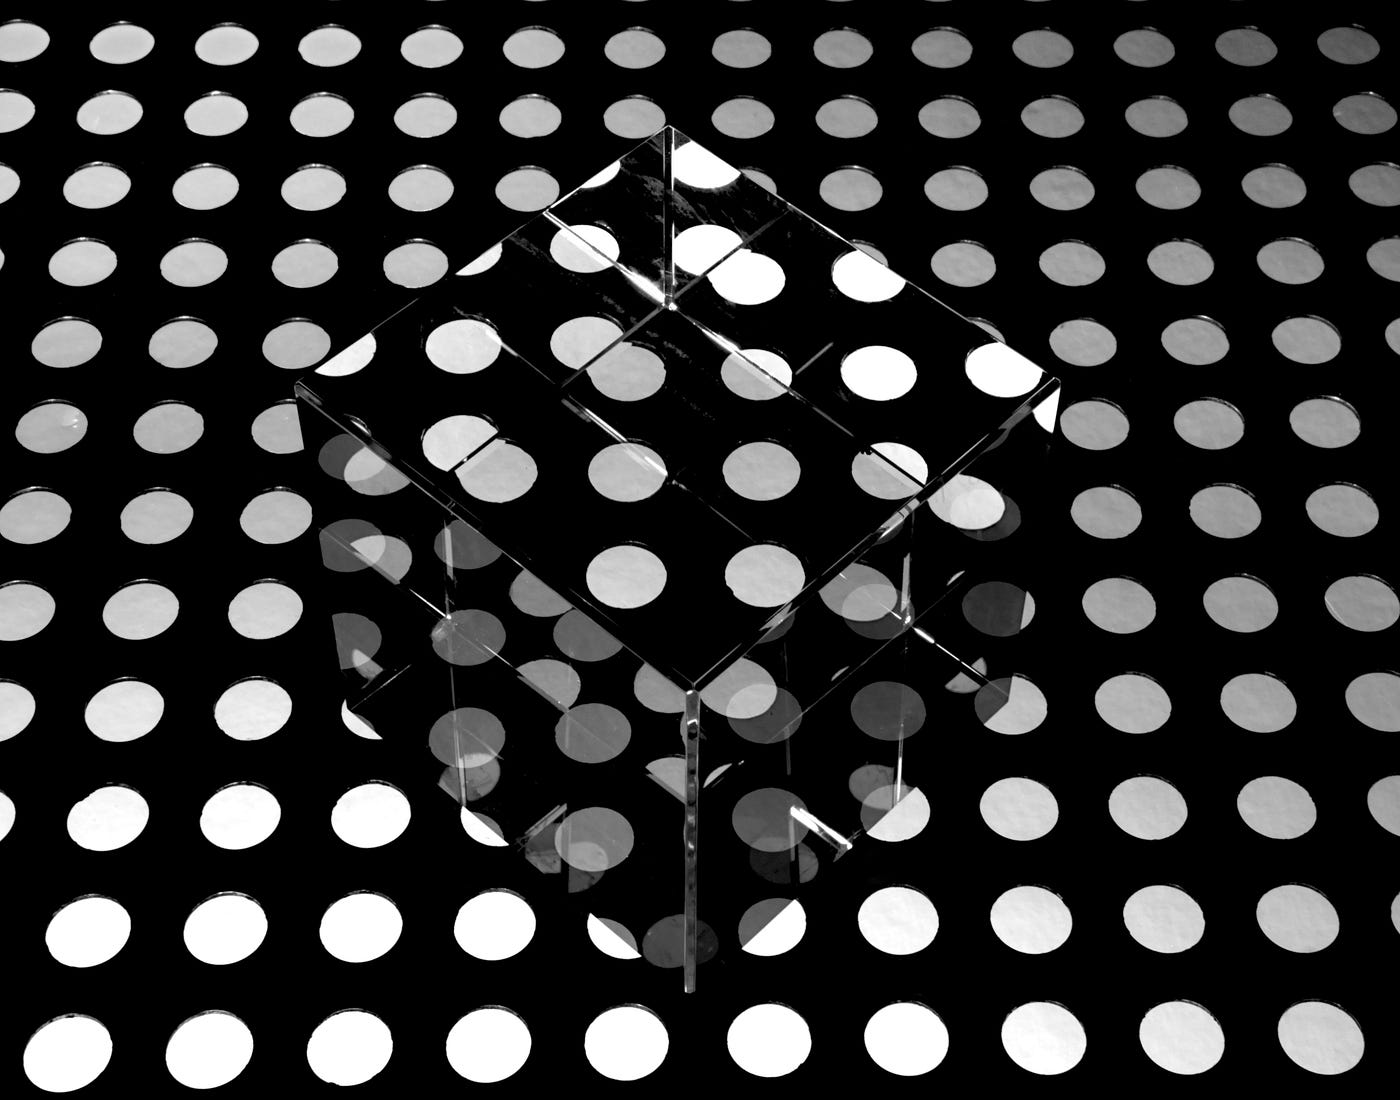 Mirrored cube in a black and white spotted background